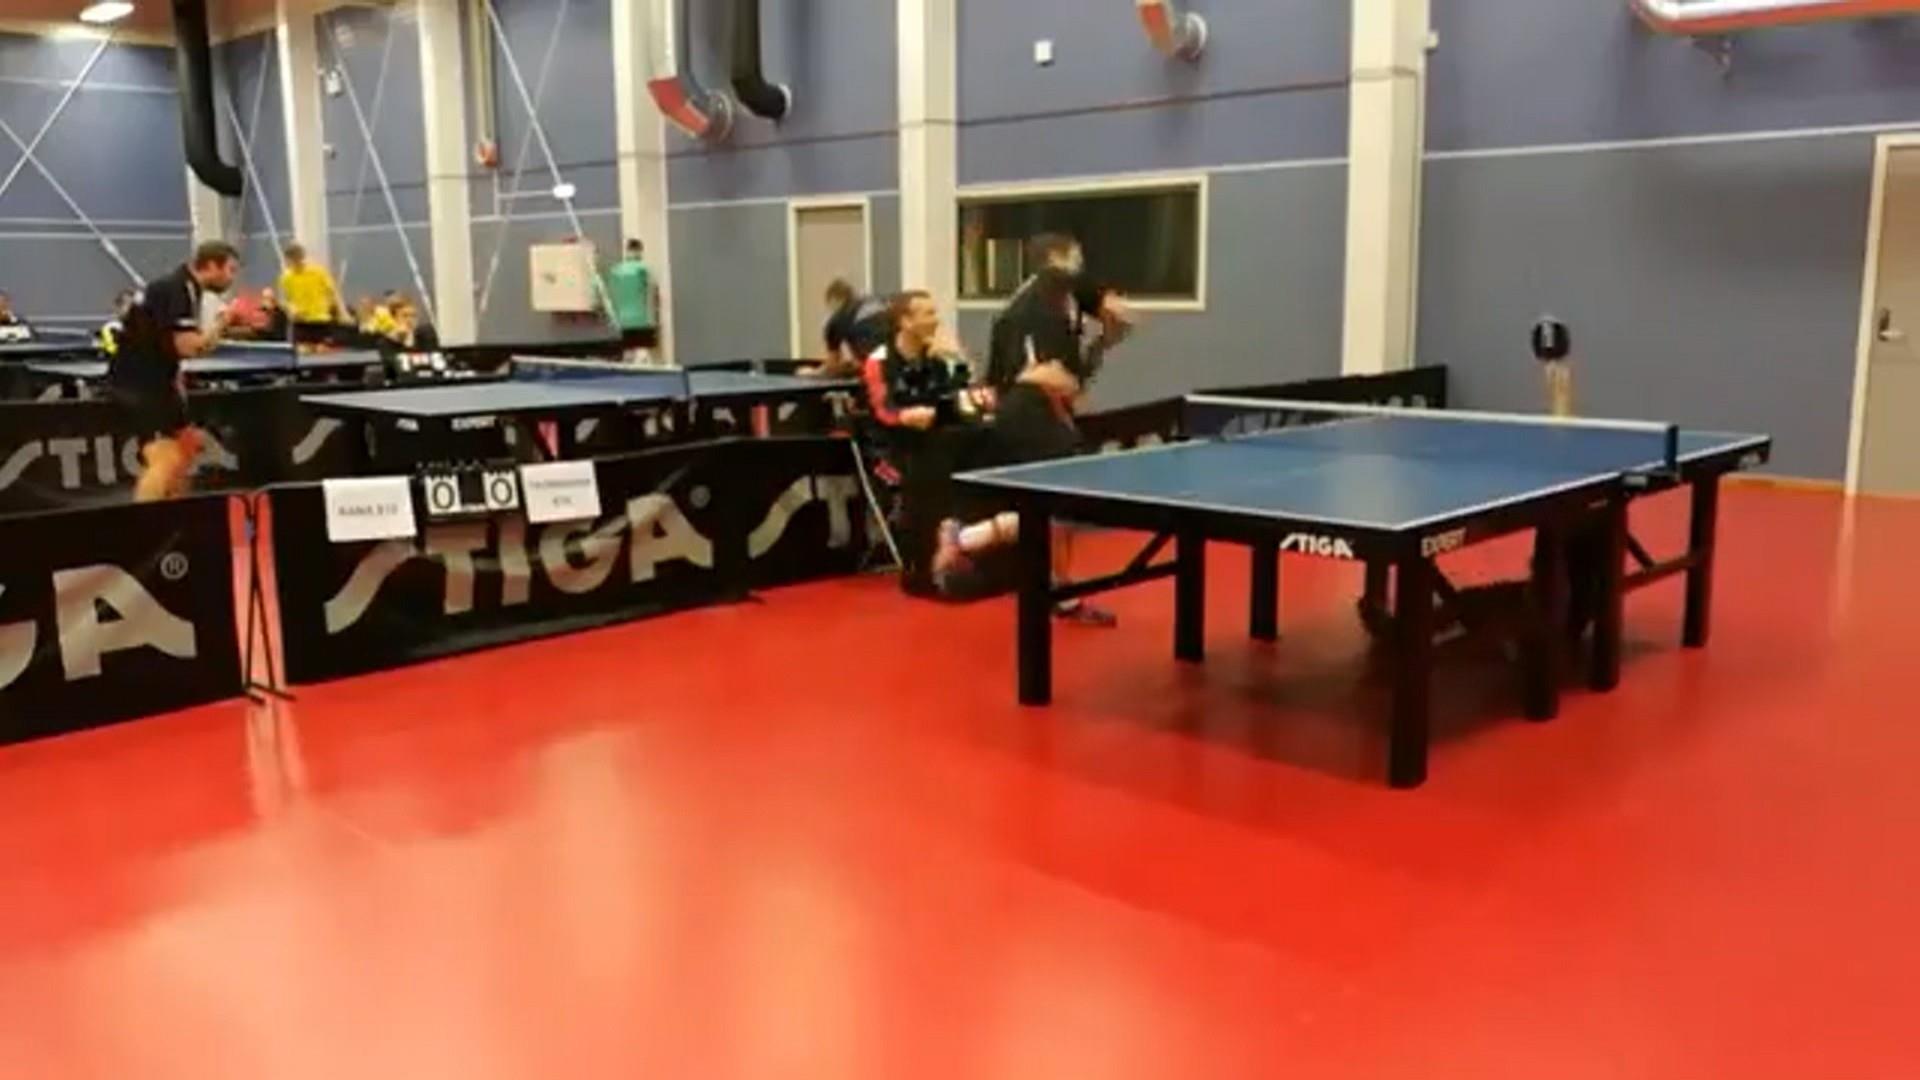 The way this ping pong player tricked his opponent by faking a shot :  r/nextfuckinglevel